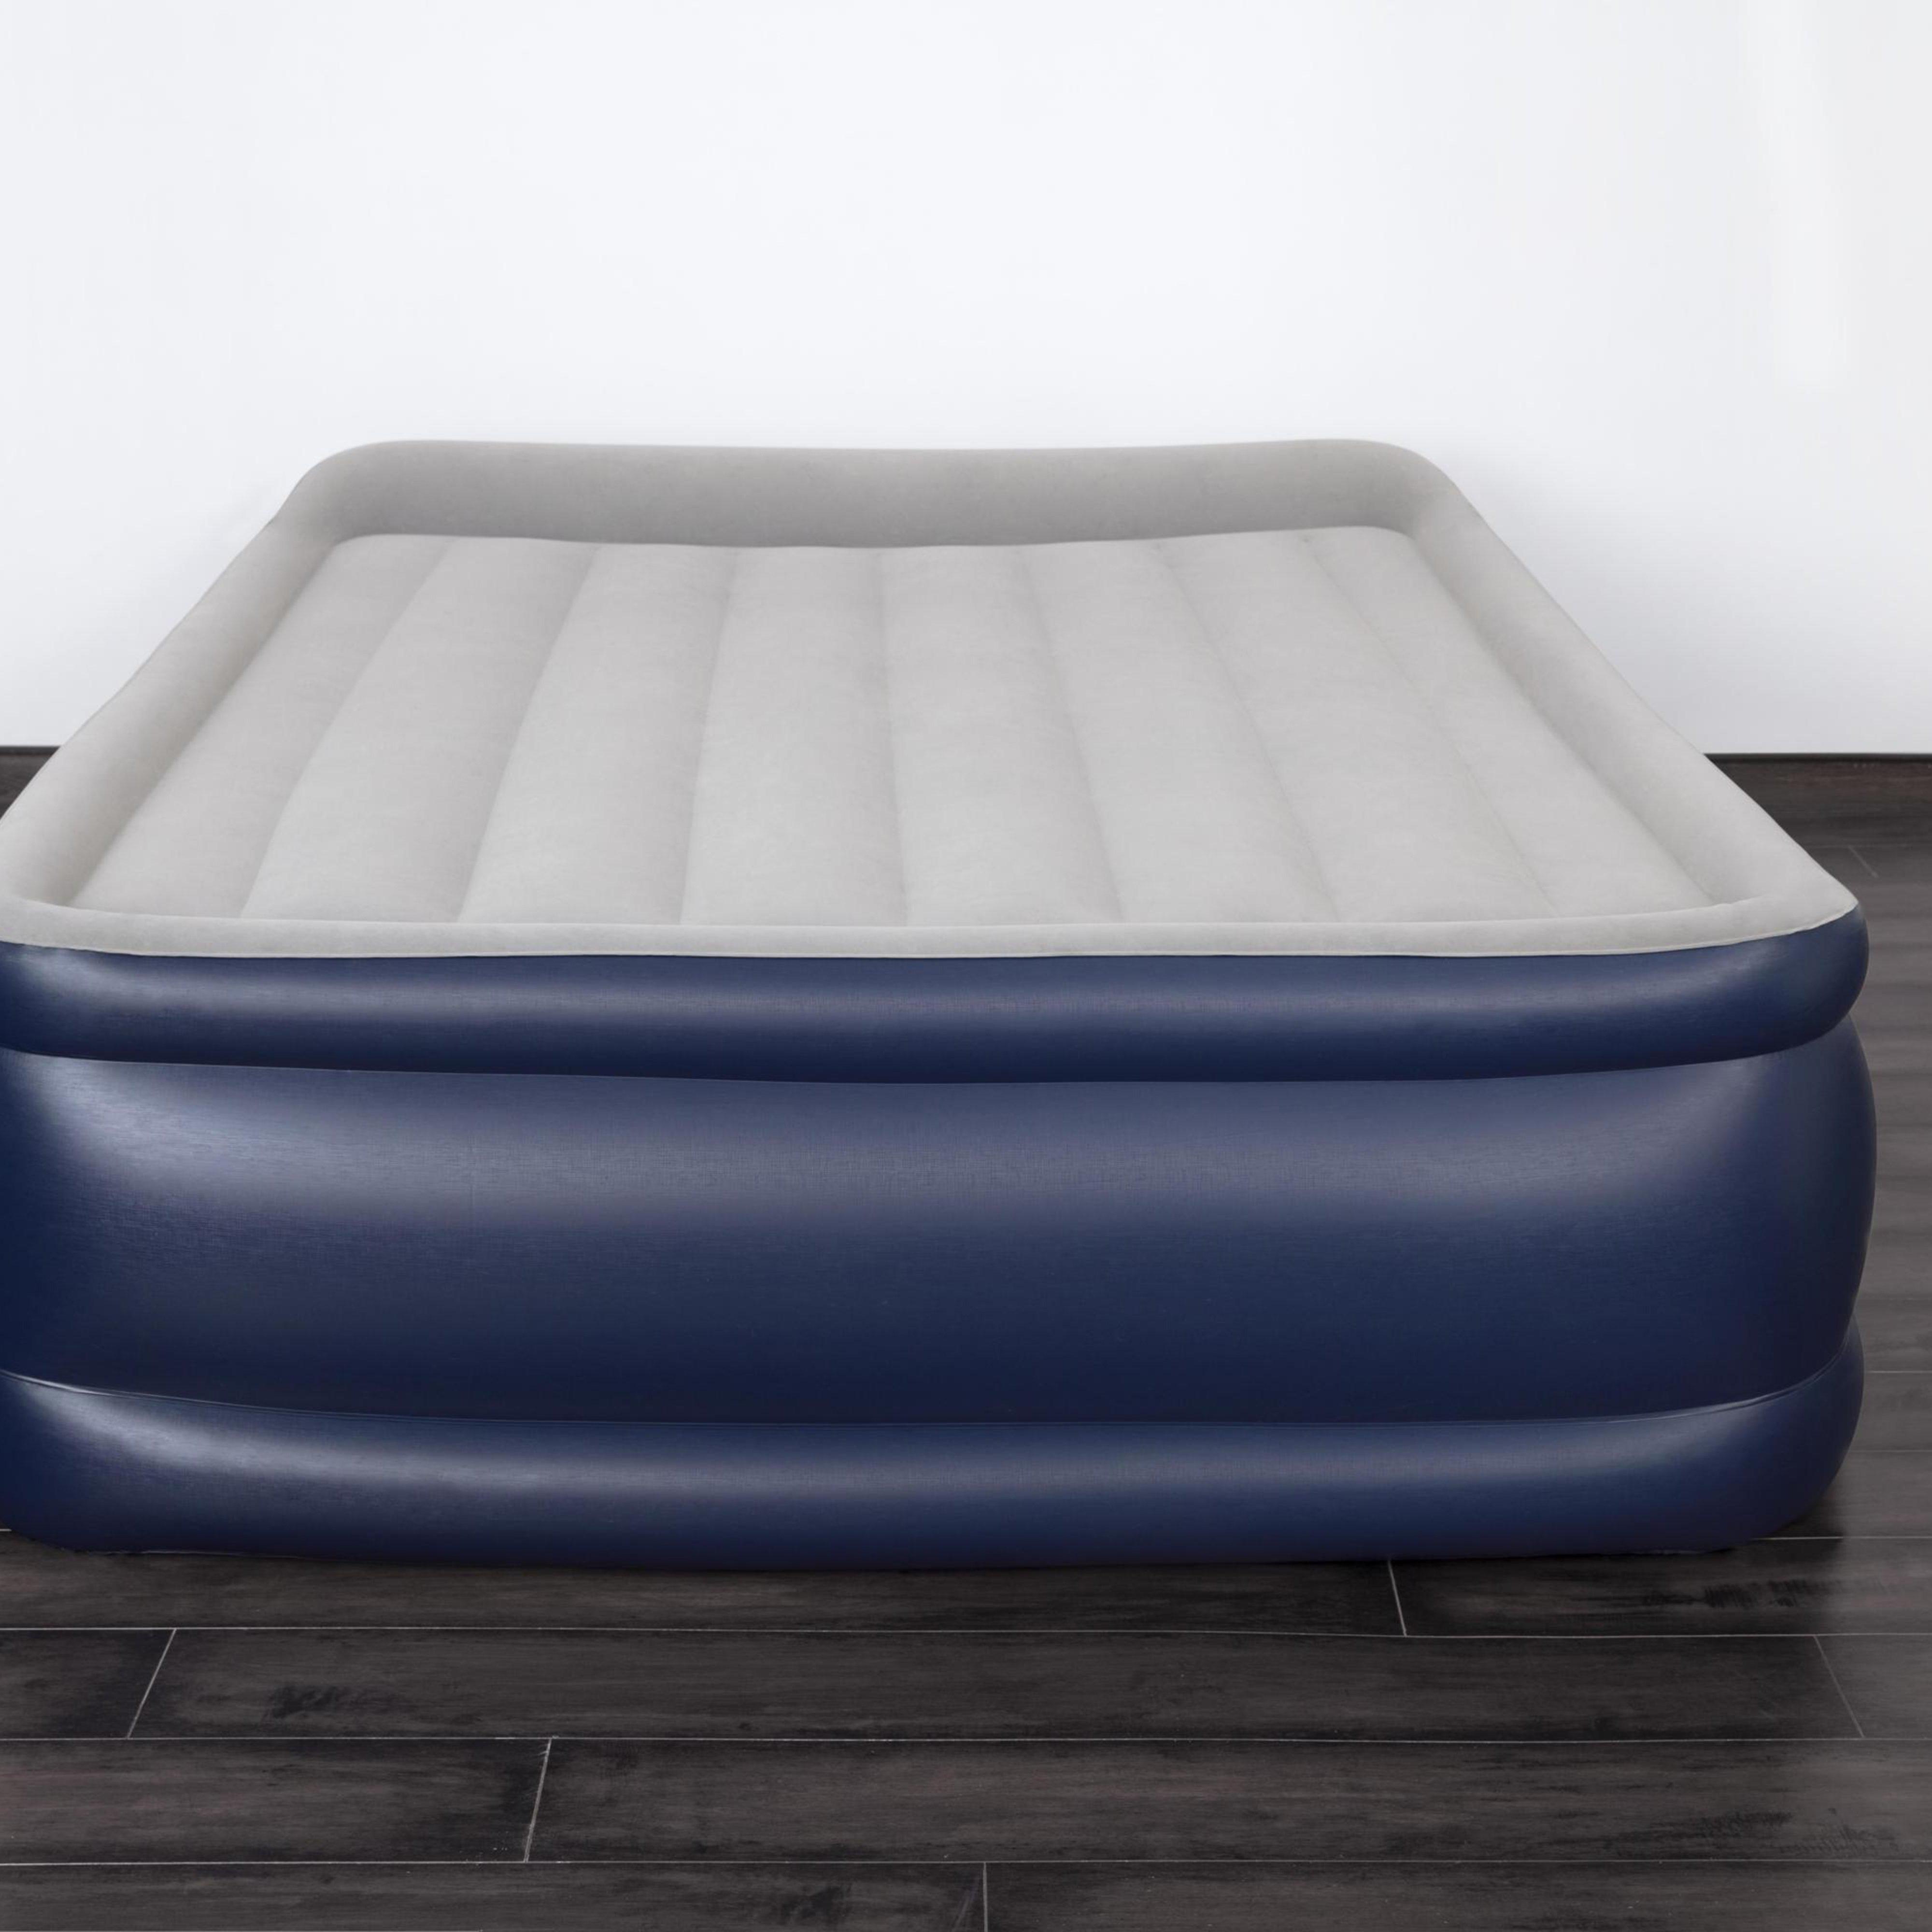 Hi-Gear High Rise Flock King Size Airbed Review